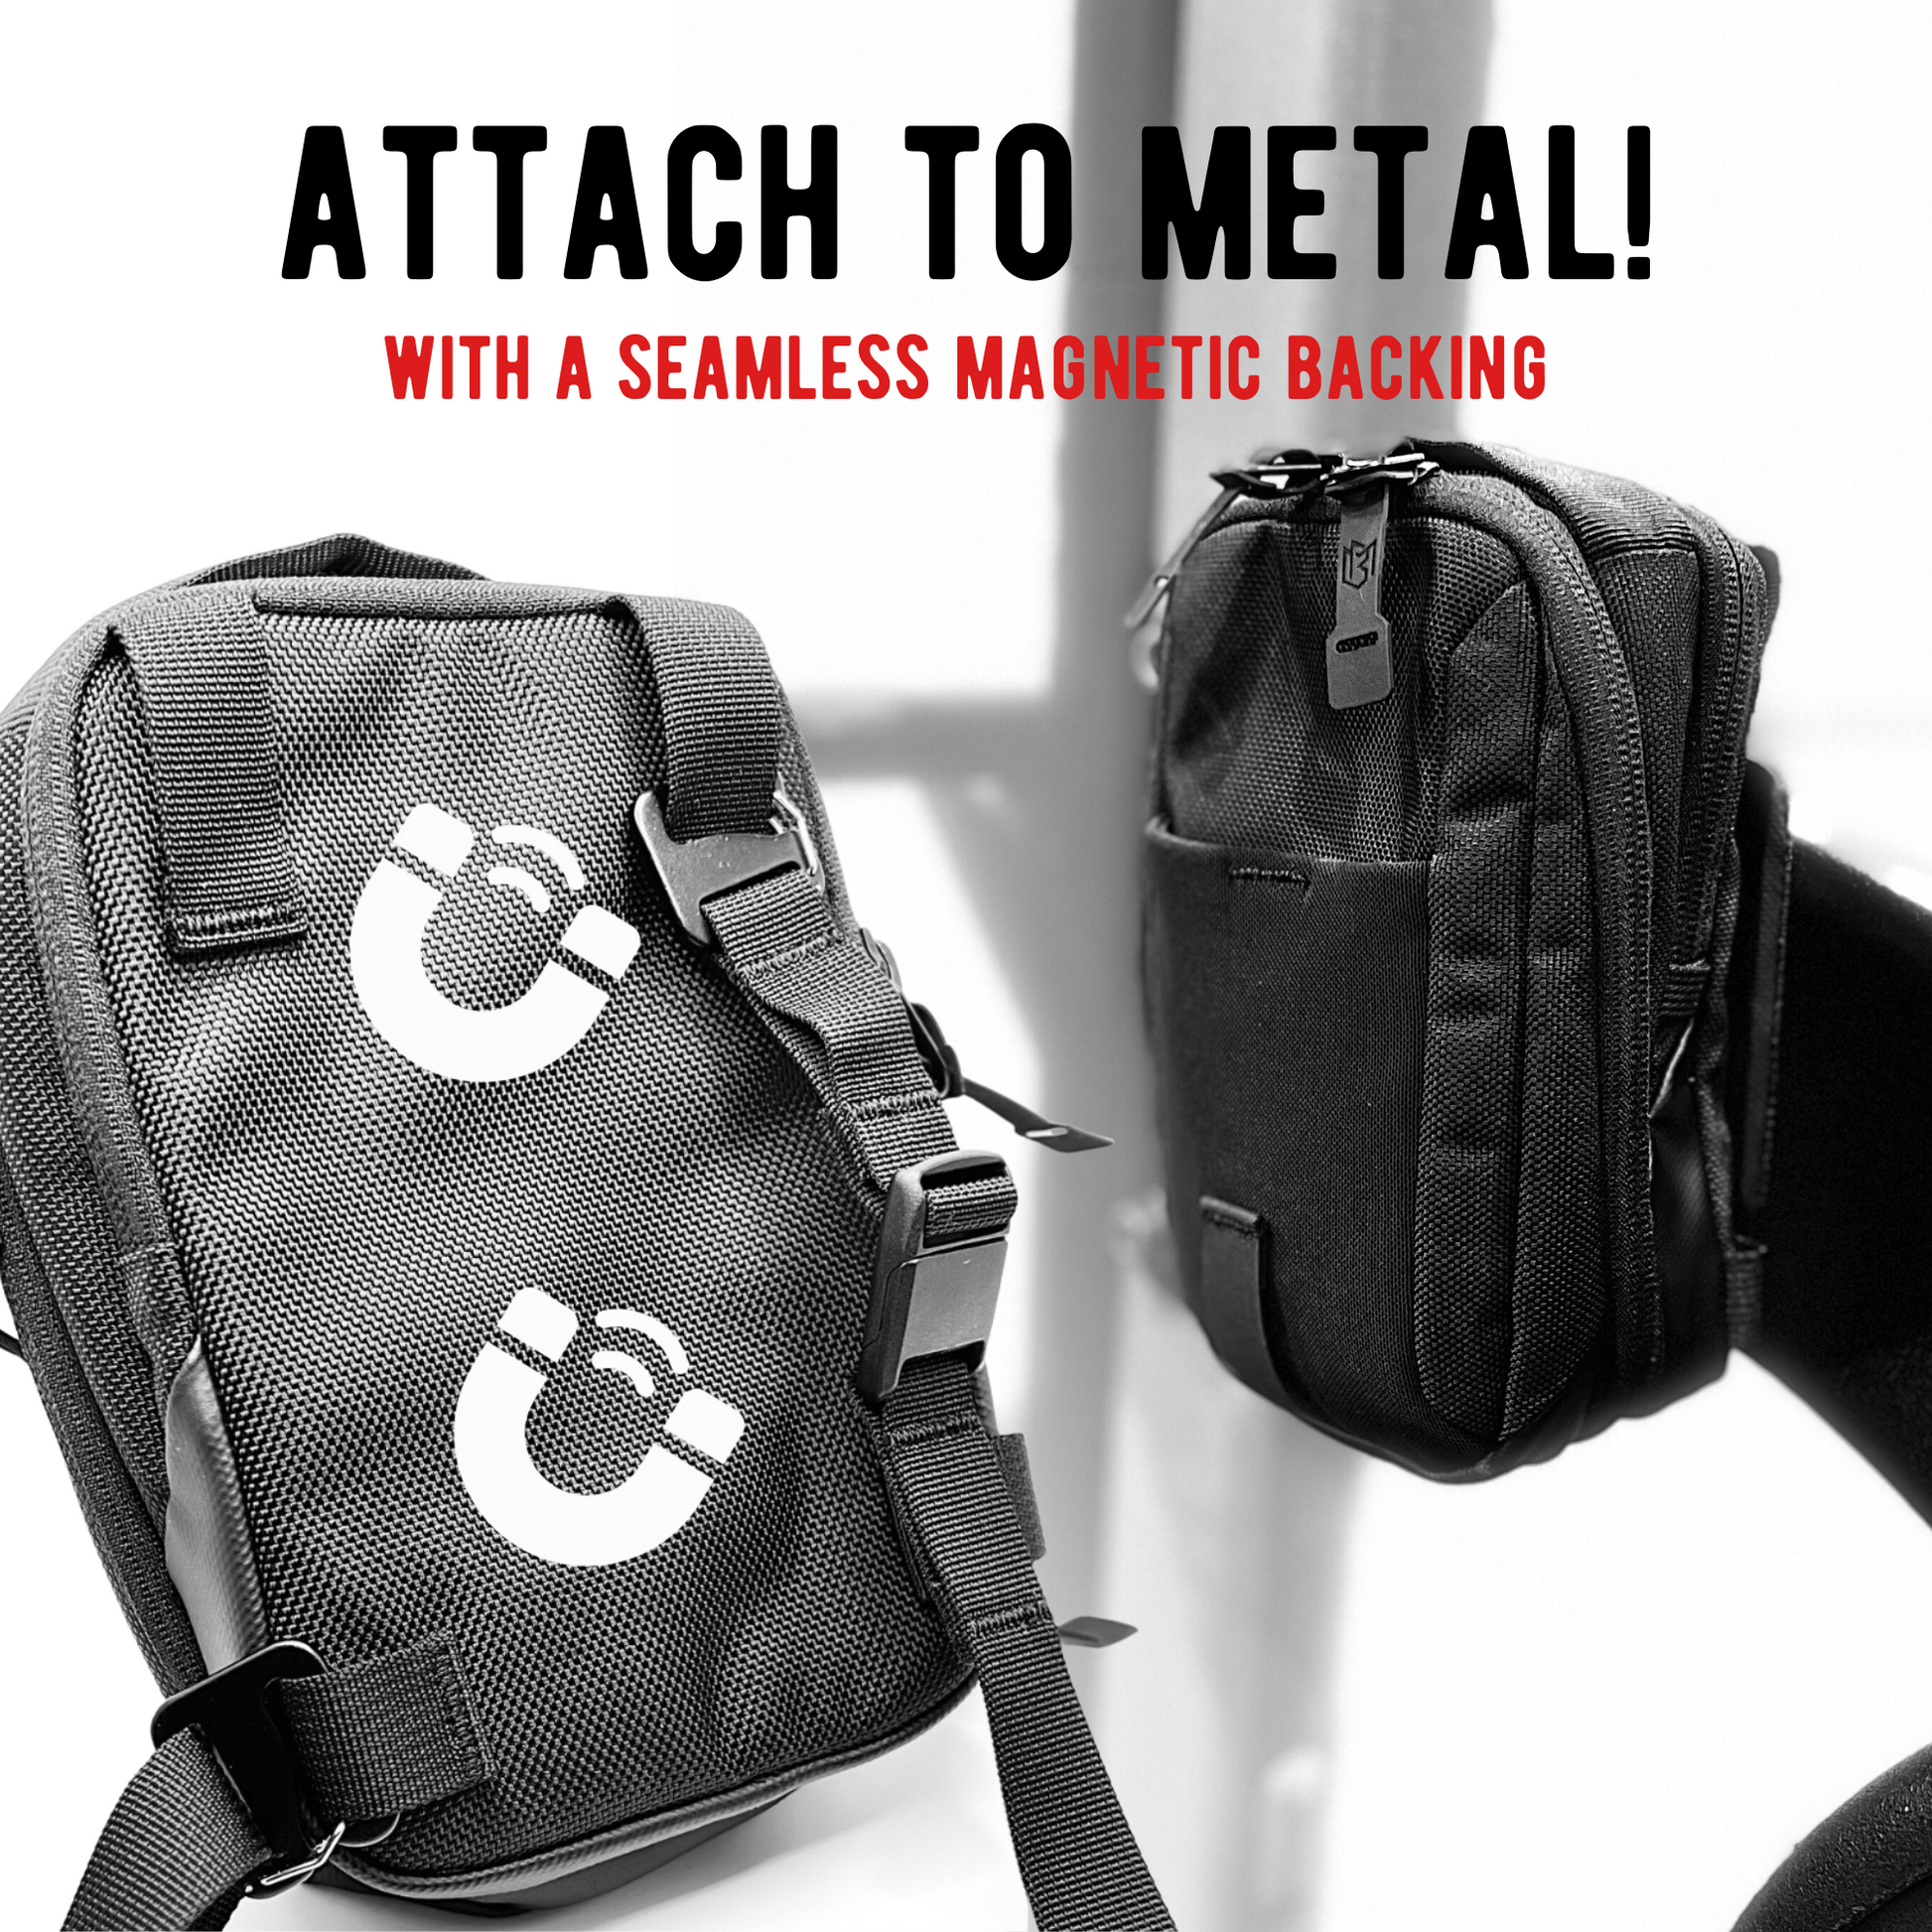 At the gym or on the go use the Magnetic Bottle Bag to attach to any s